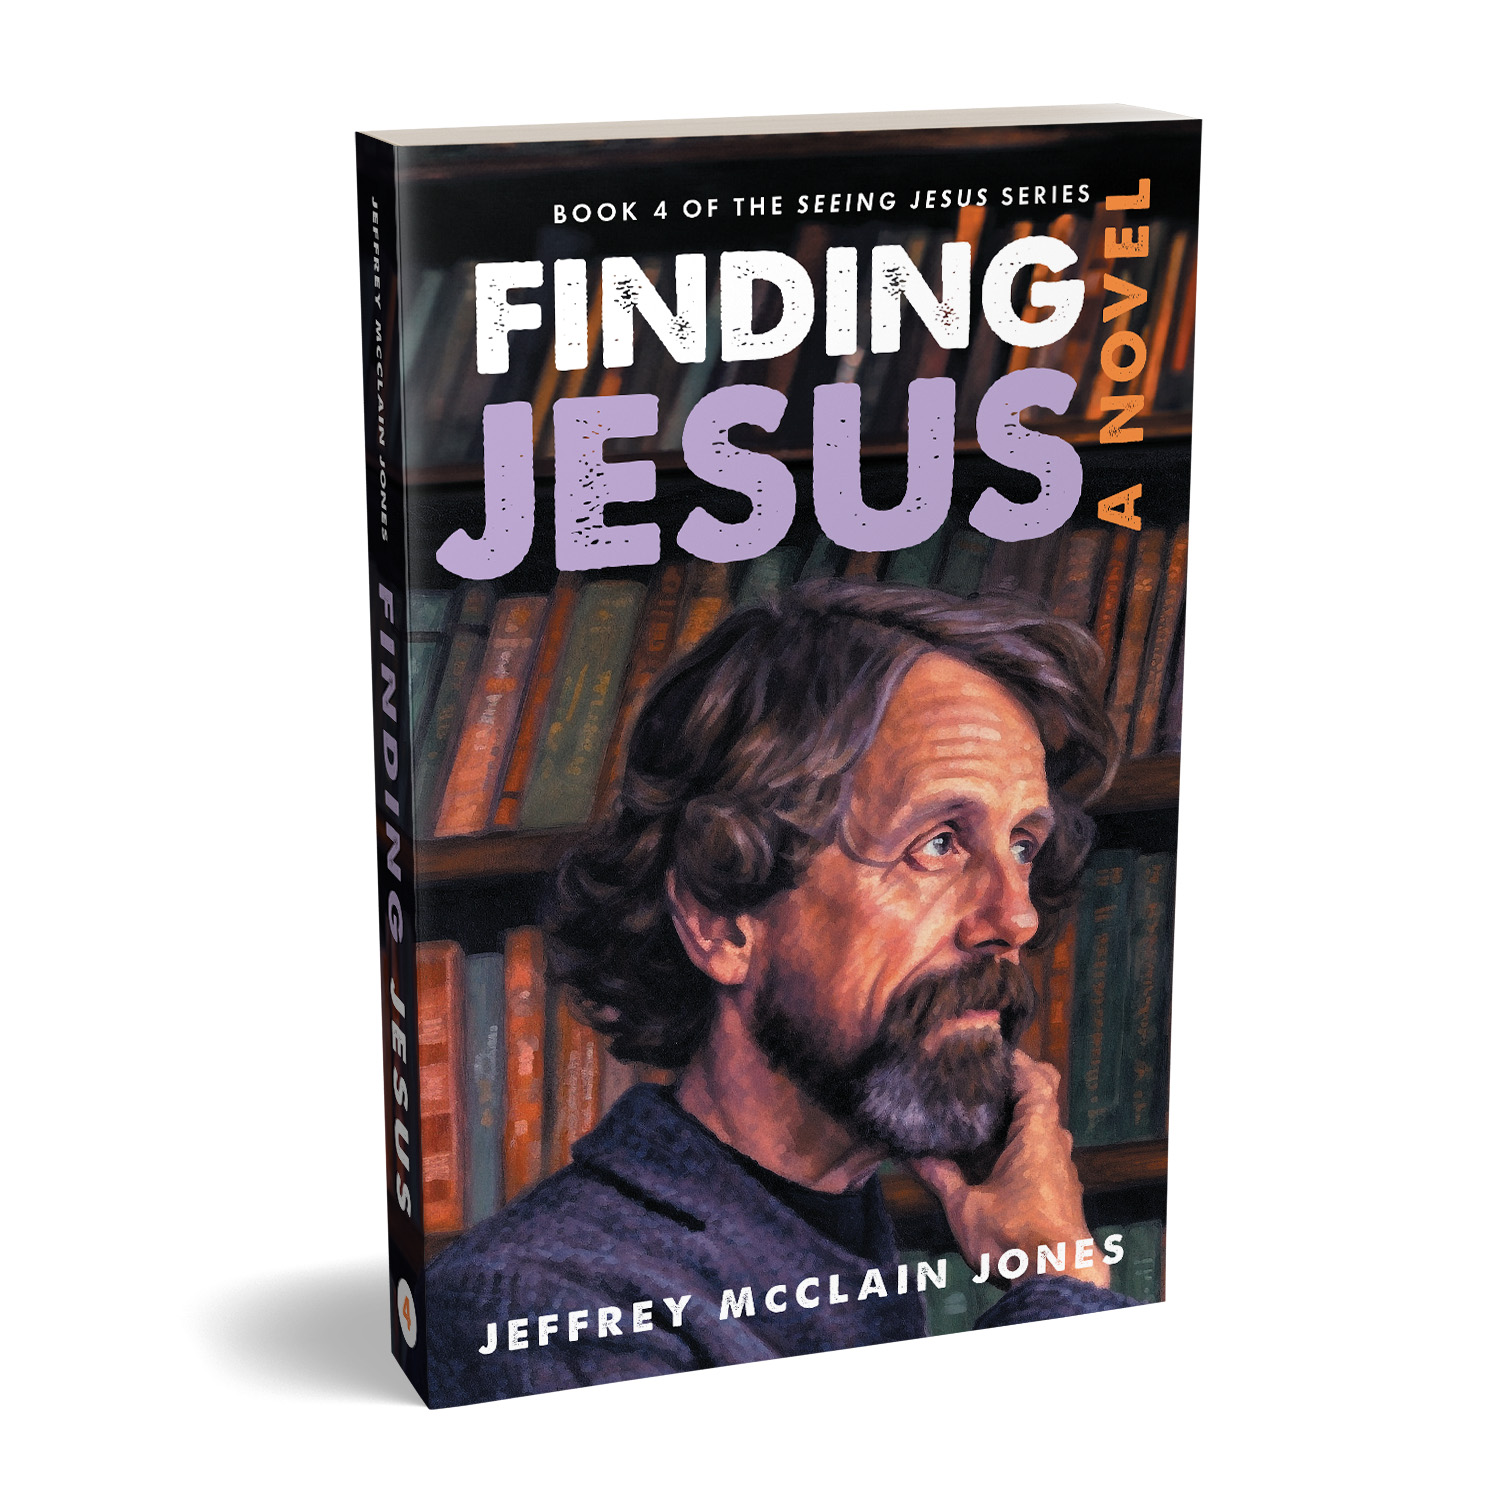 The 'Seeing Jesus' series is an ongoing collection of uplifting novels about people from all walks of life enjoying a spiritual awakening. The author is Jeffrey McClain Jones. The cover designs are by Mark Thomas of coverness.com. To find out more about my book design services, please visit www.coverness.com.